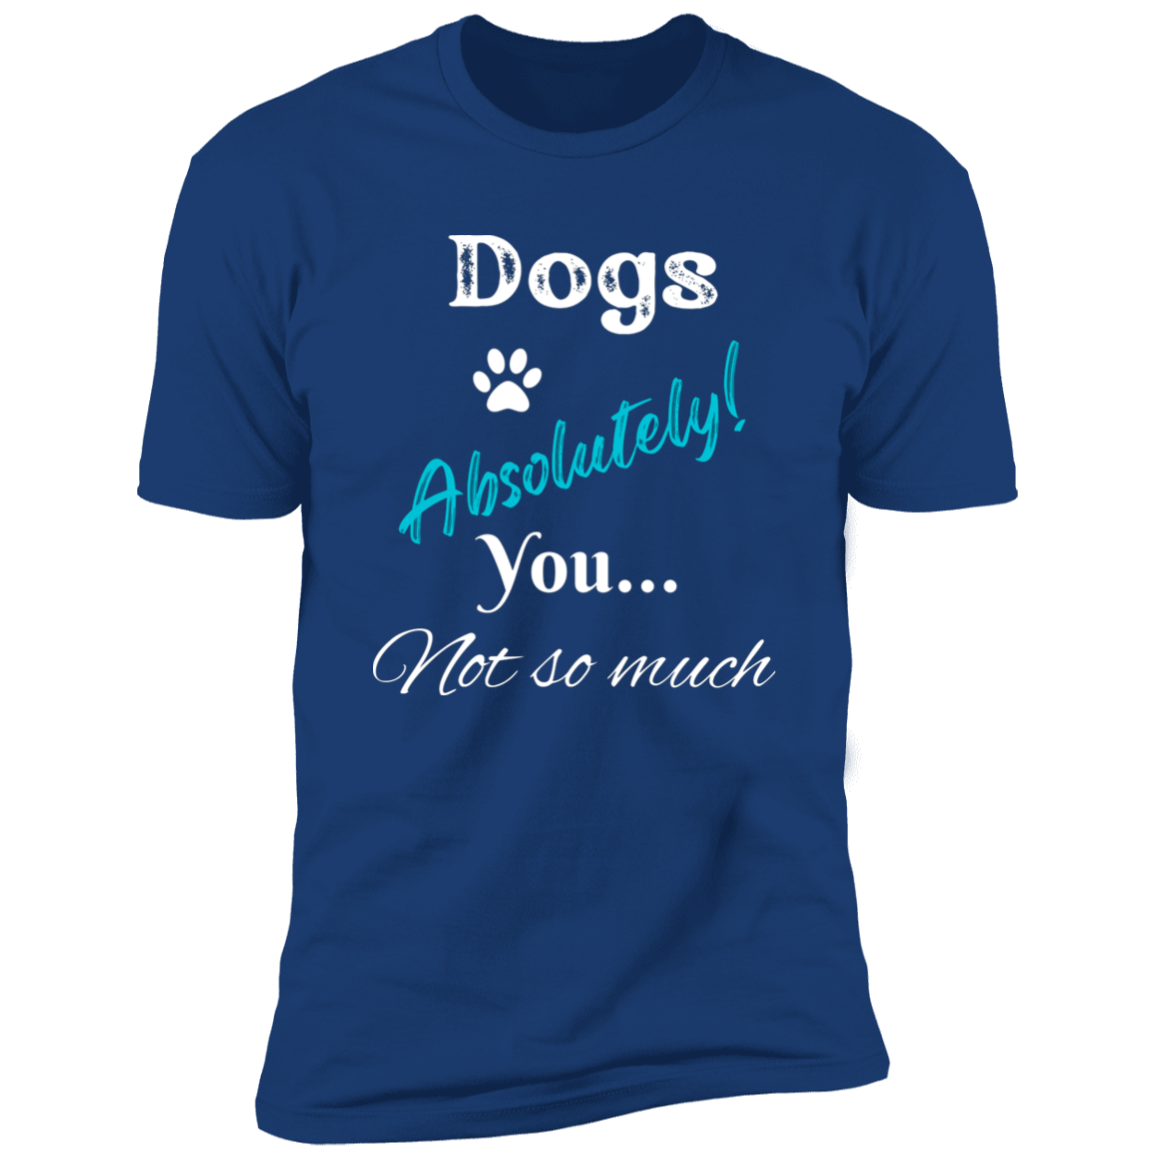 Dogs Absolutely! You Not So Much T-shirt, funny dog shirt dog shirt for humans, in royal blue